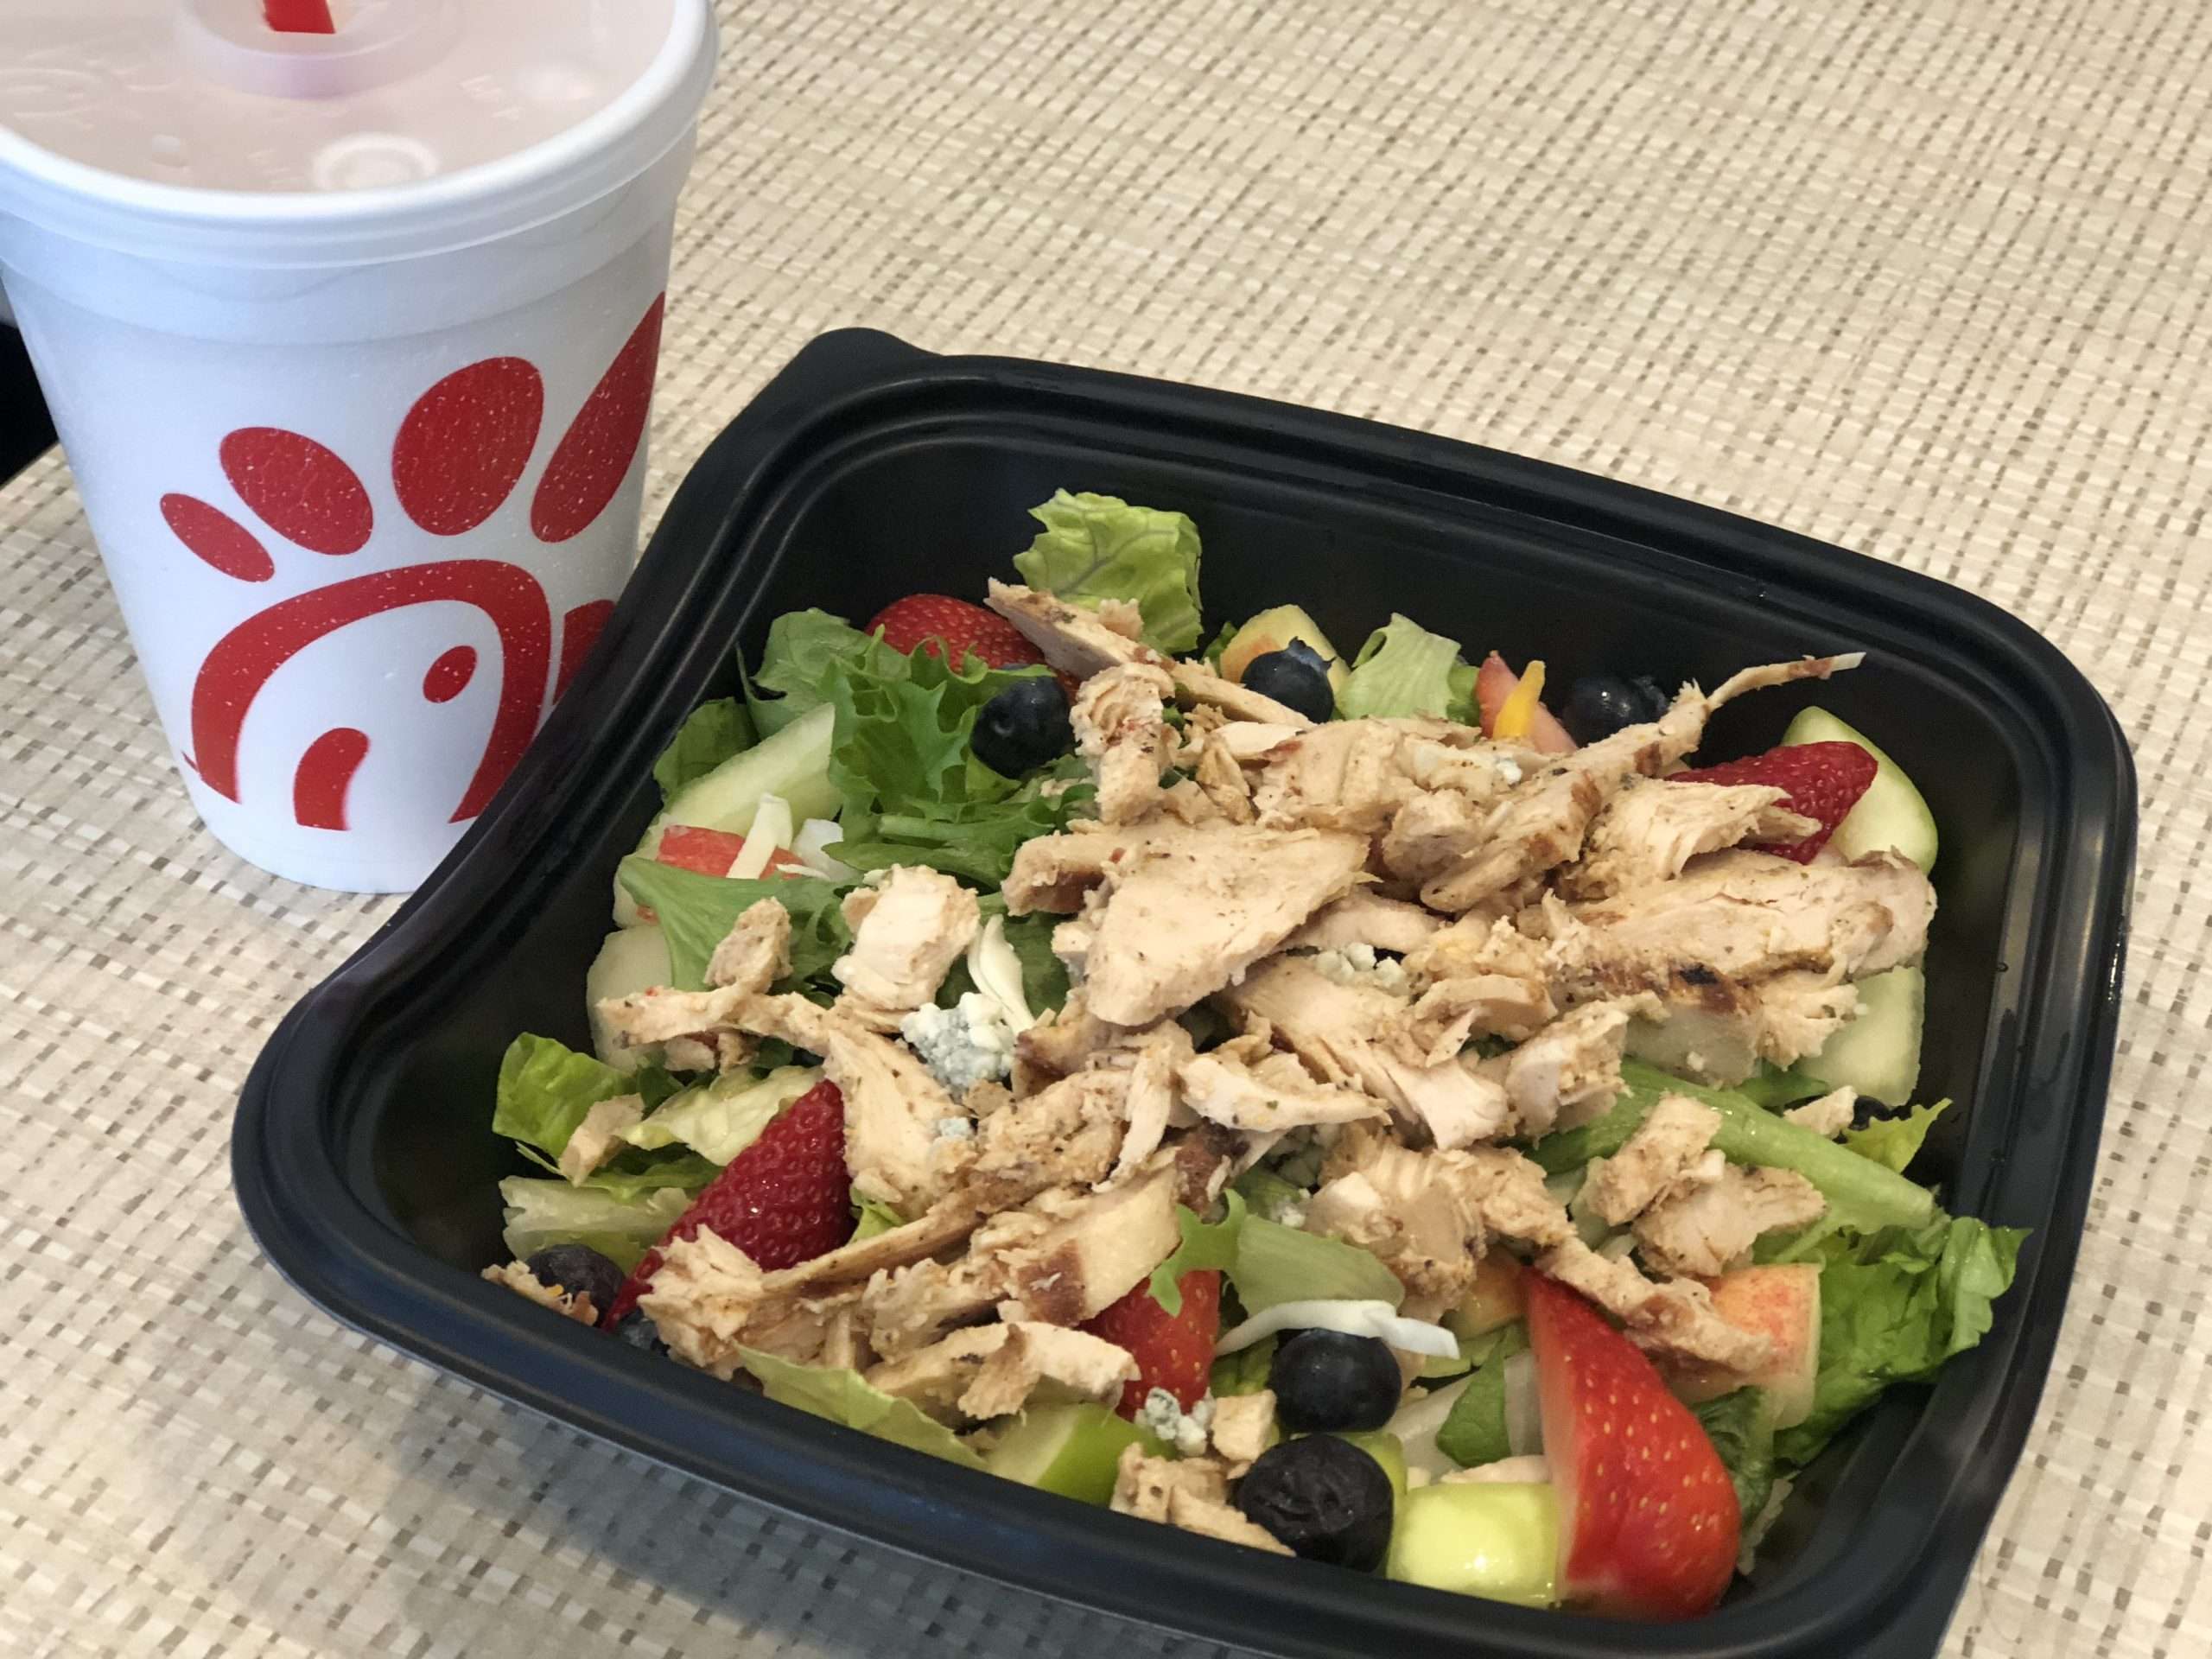 HEALTHY RESTAURANT ORDERS: Chick